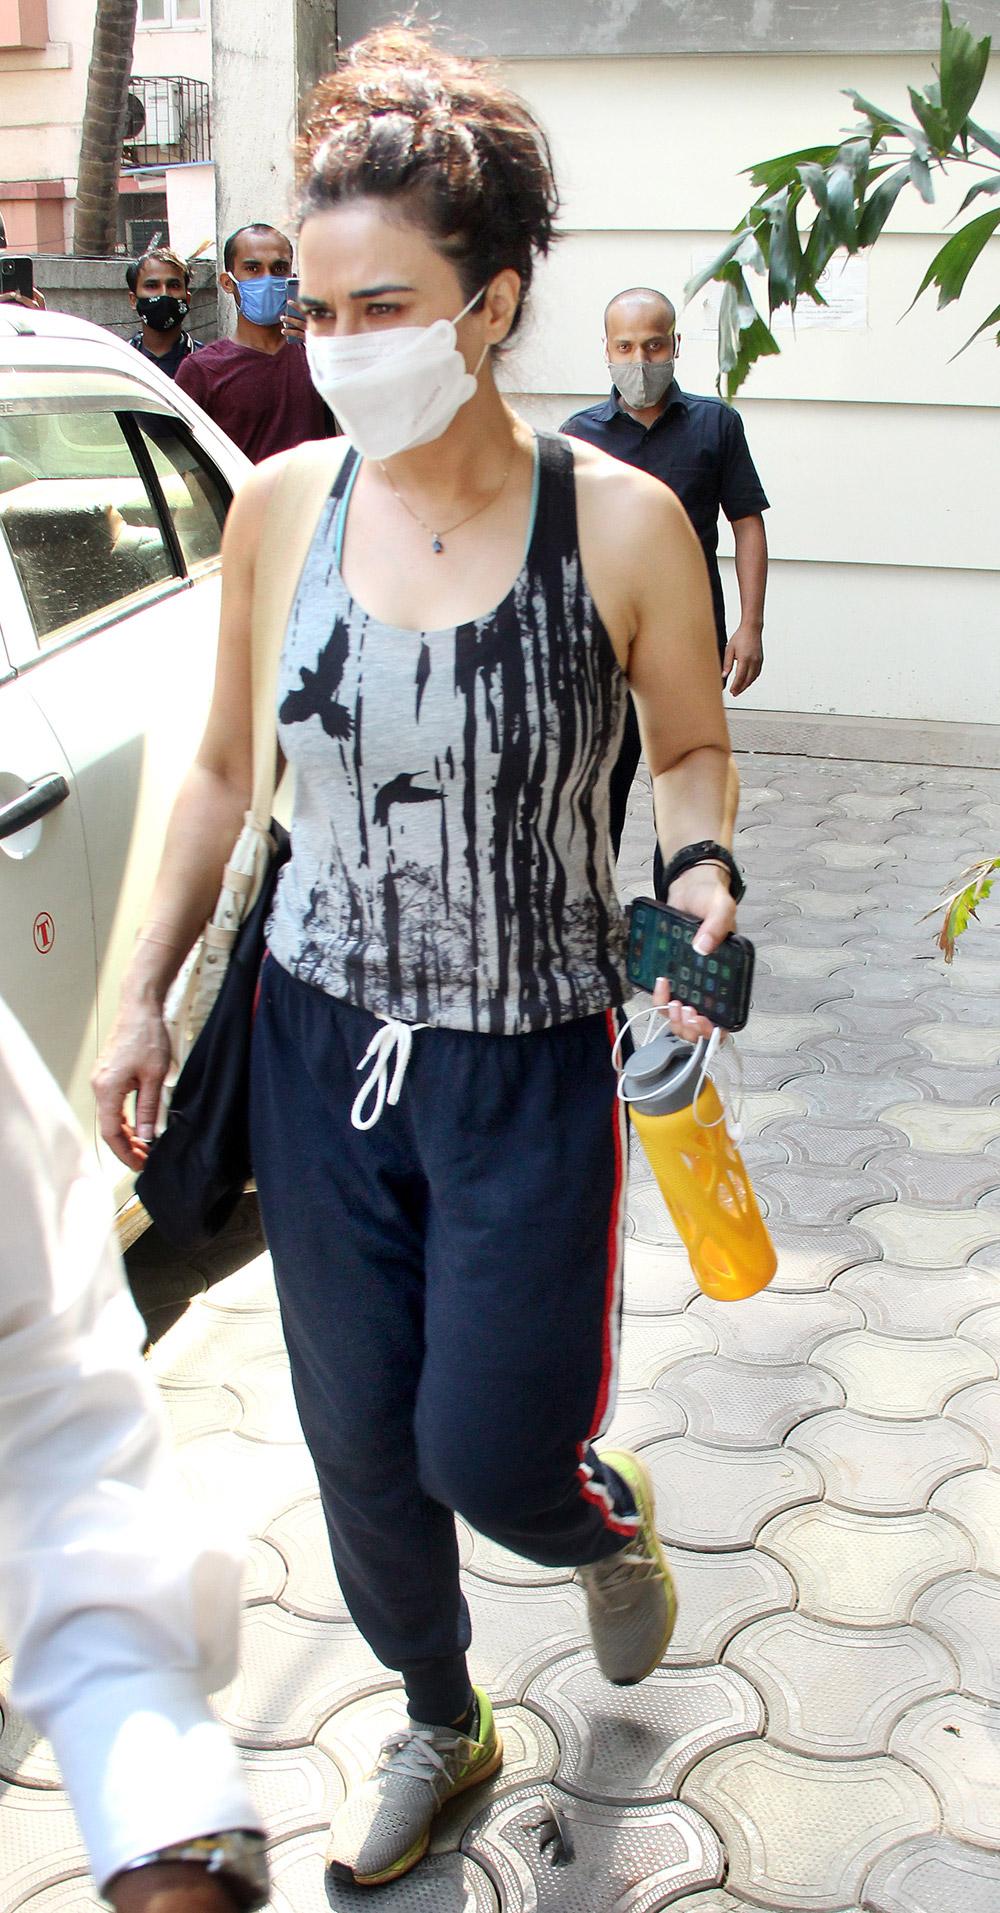 Preity Zinta dressed in a grey tank top, navy blue track pants and white face mask as she was clicked out and about in Bandra, Mumbai.